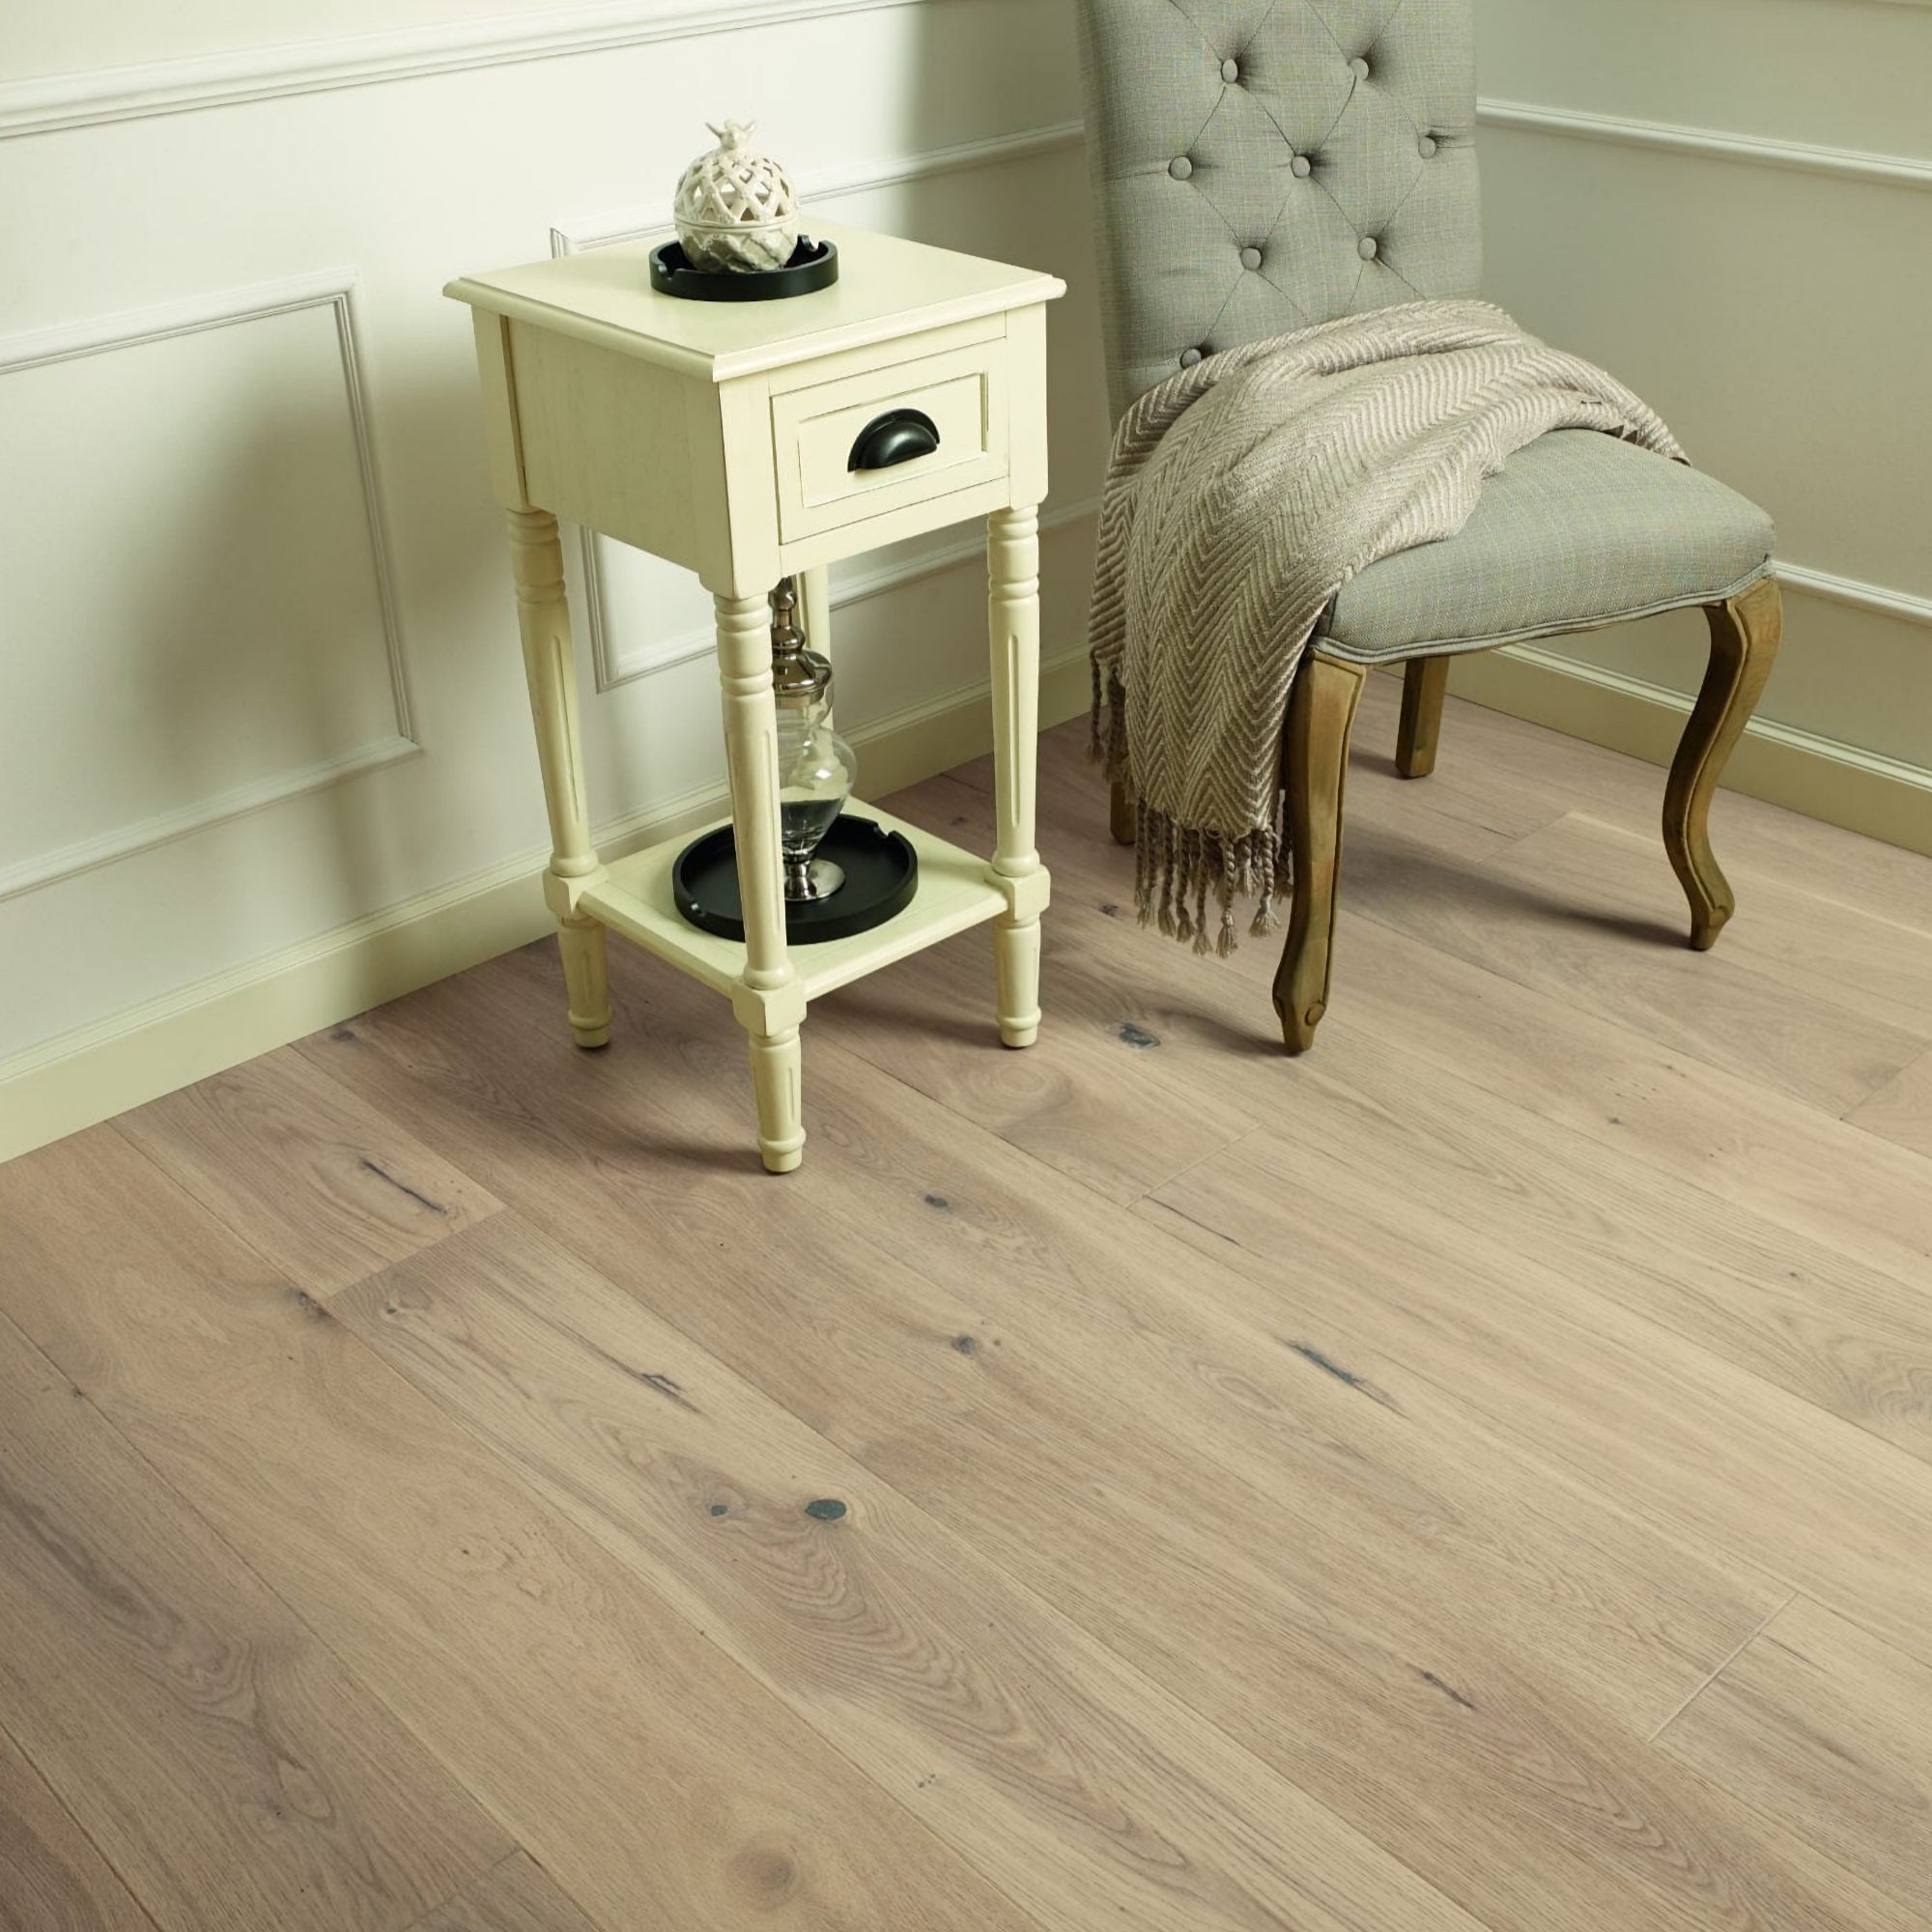 AL102 Jetsam Oak - Extra long Brushed, Natural Stained, Wooden Plank